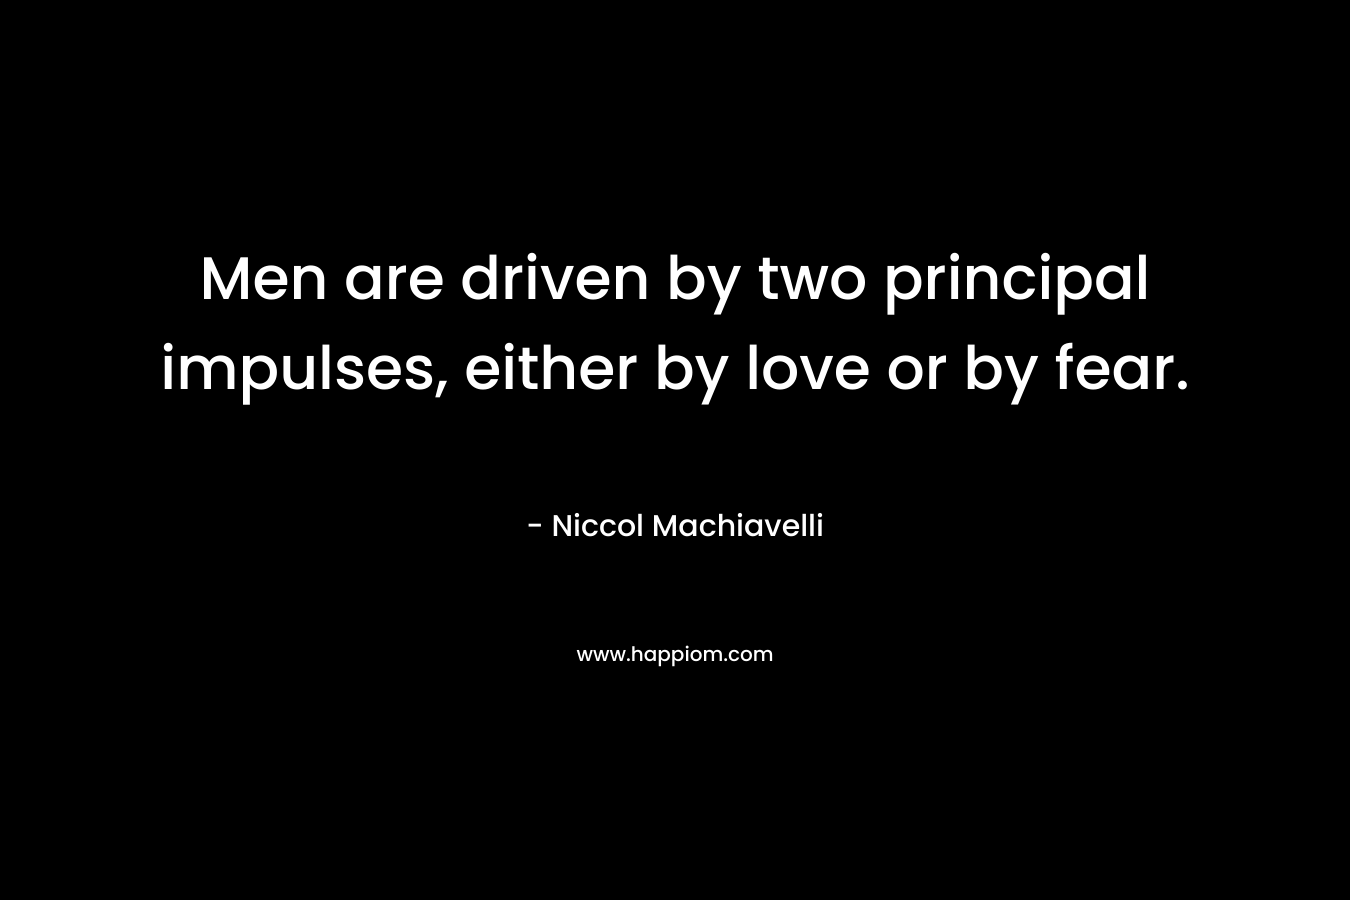 Men are driven by two principal impulses, either by love or by fear. – Niccol Machiavelli